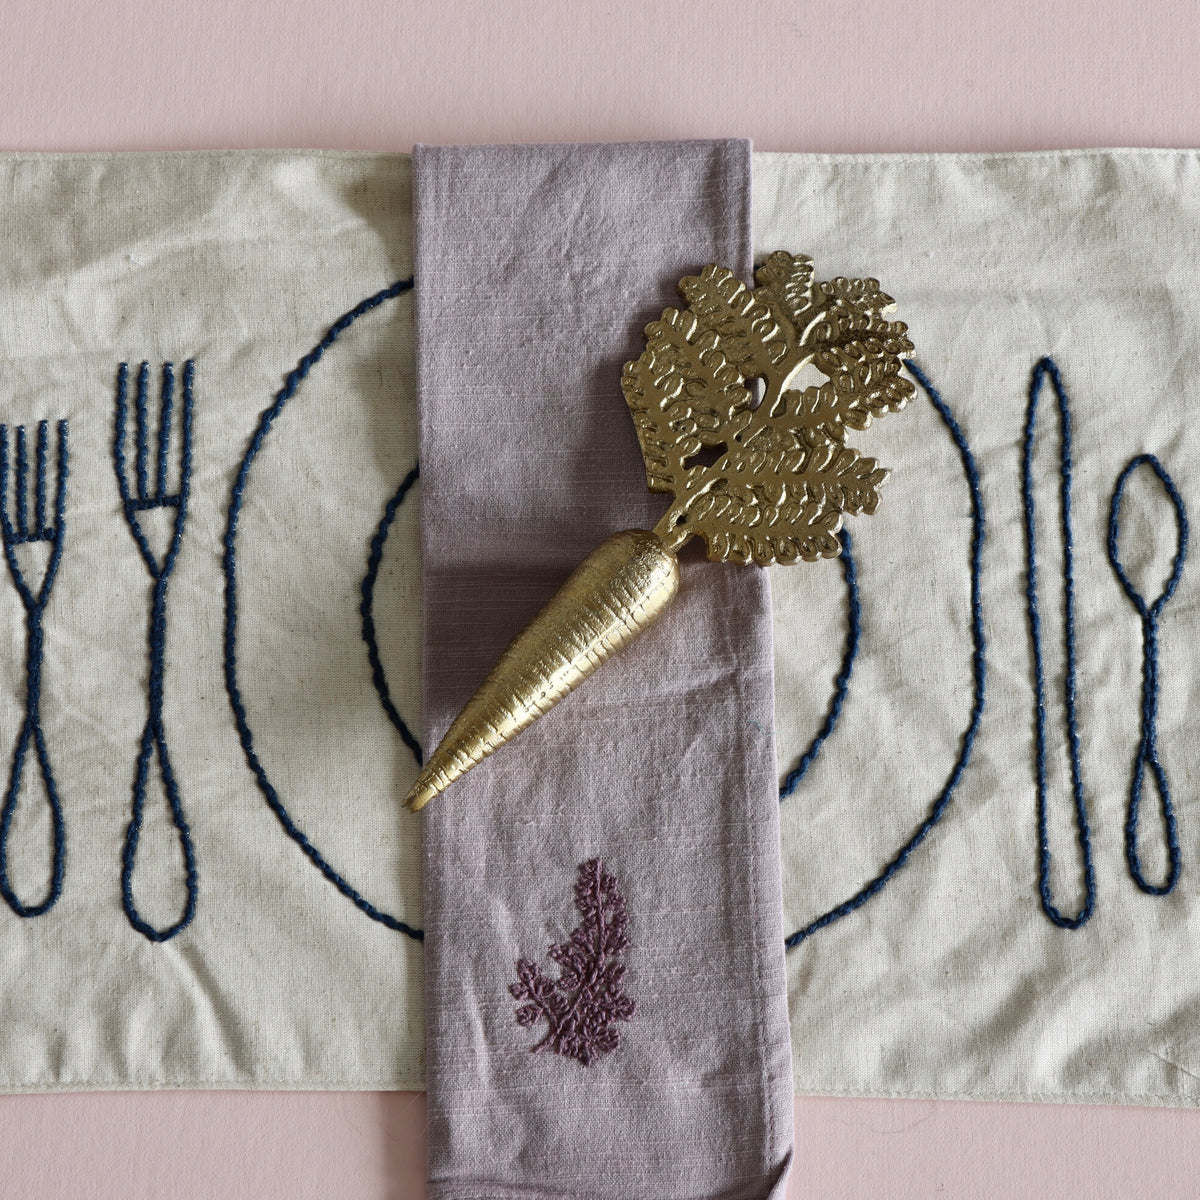 Embroidered Place Setting Linen Placemat - Holistic Habitat 